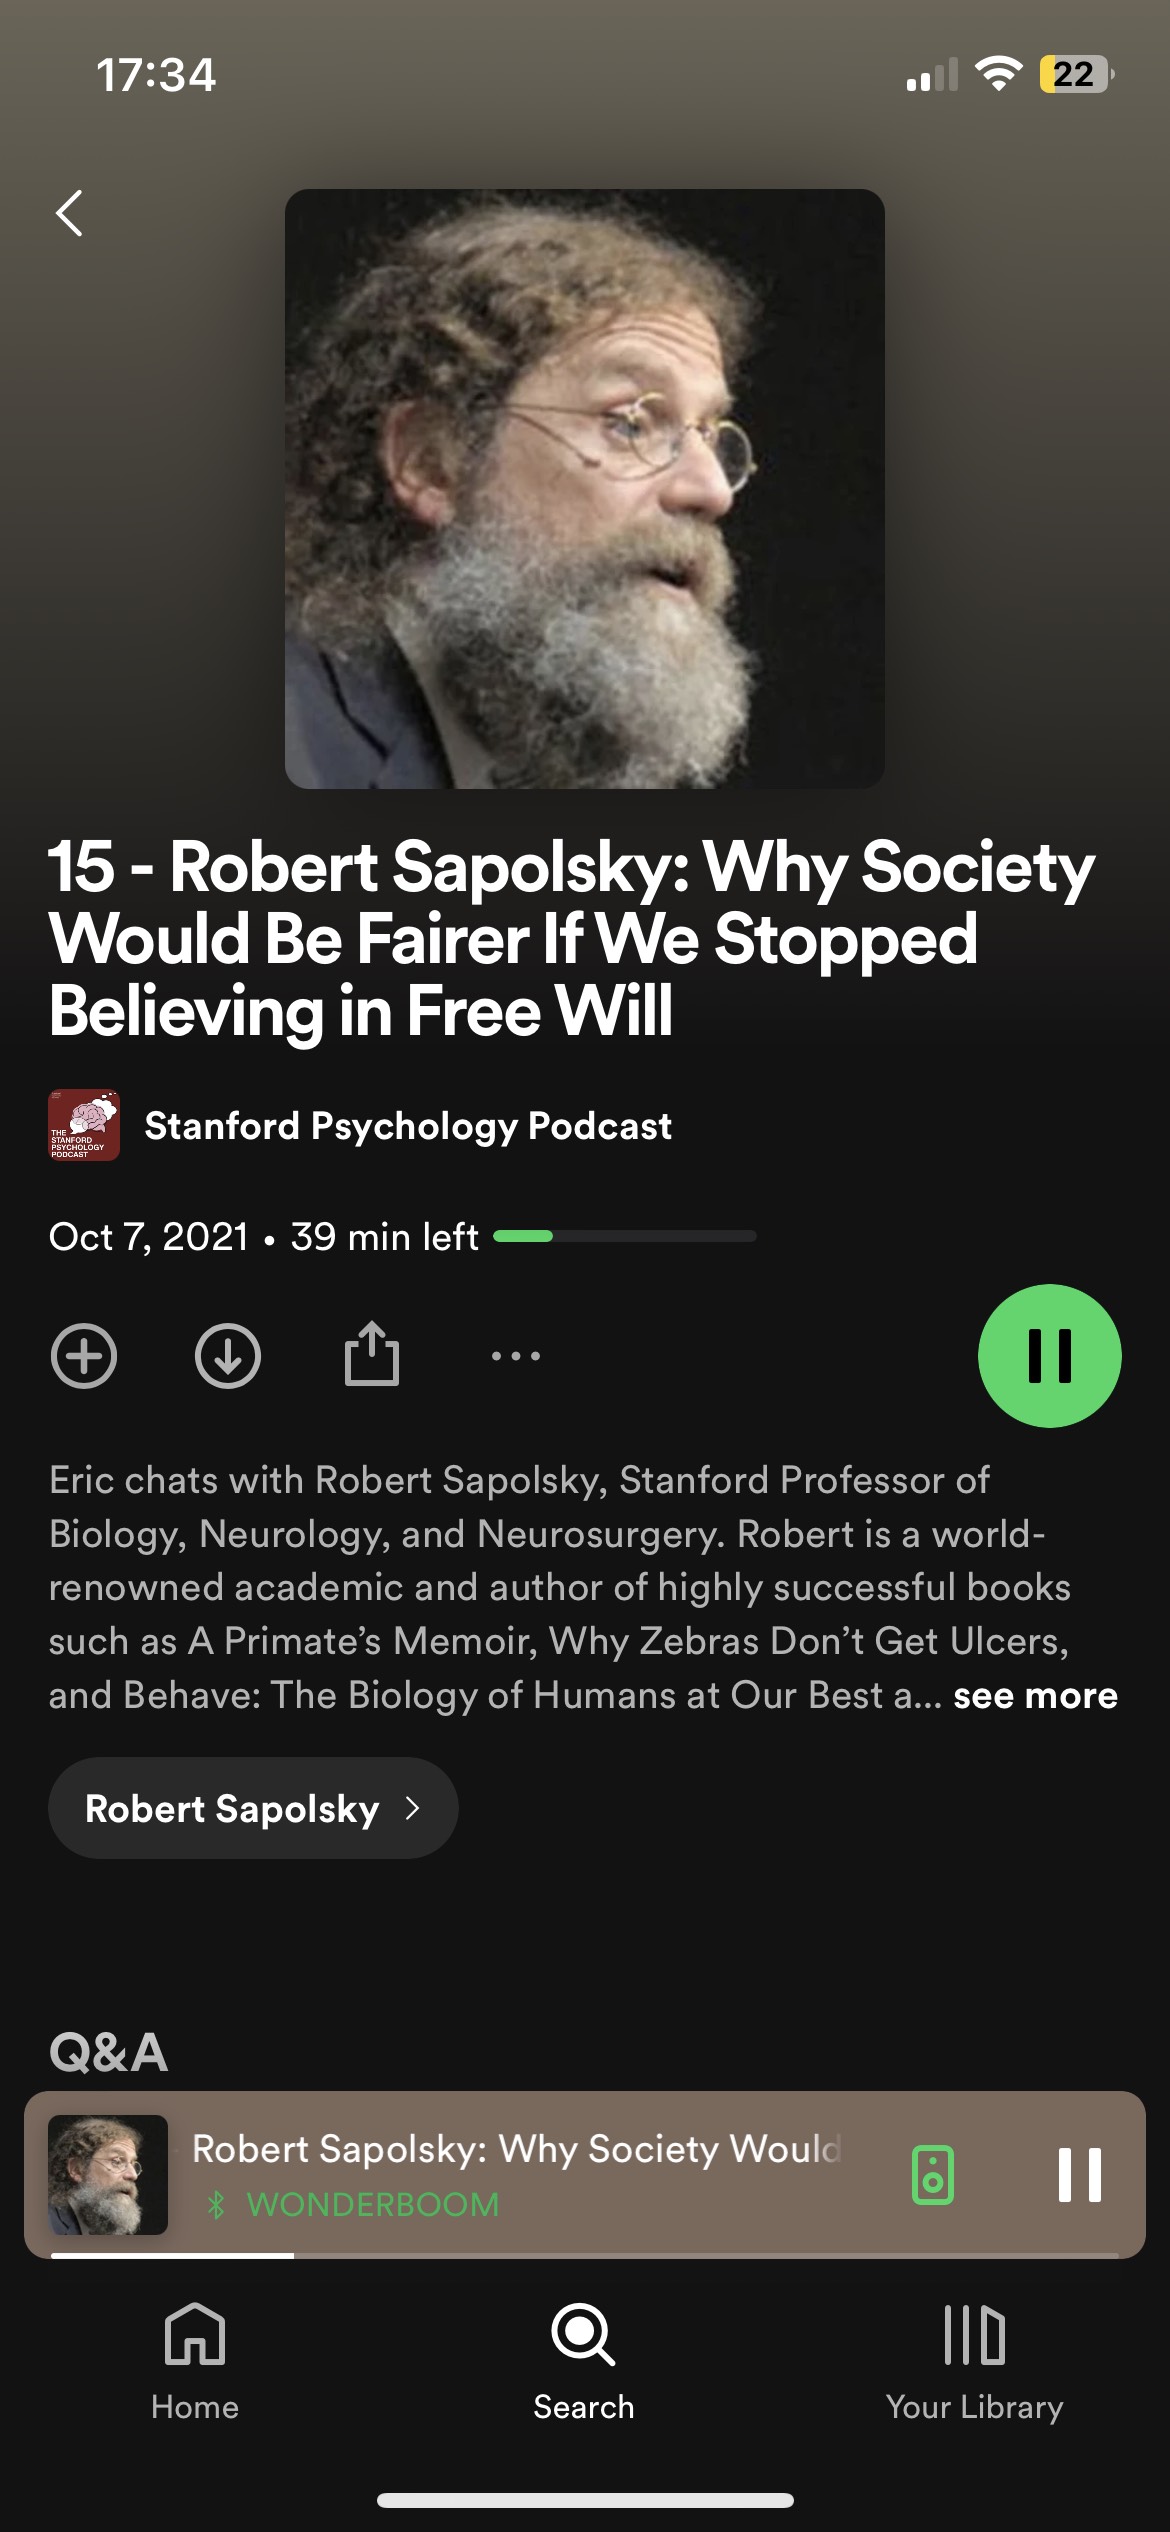 Robert Sapolsky of Stanford hits the top nonfiction list with 'Behave